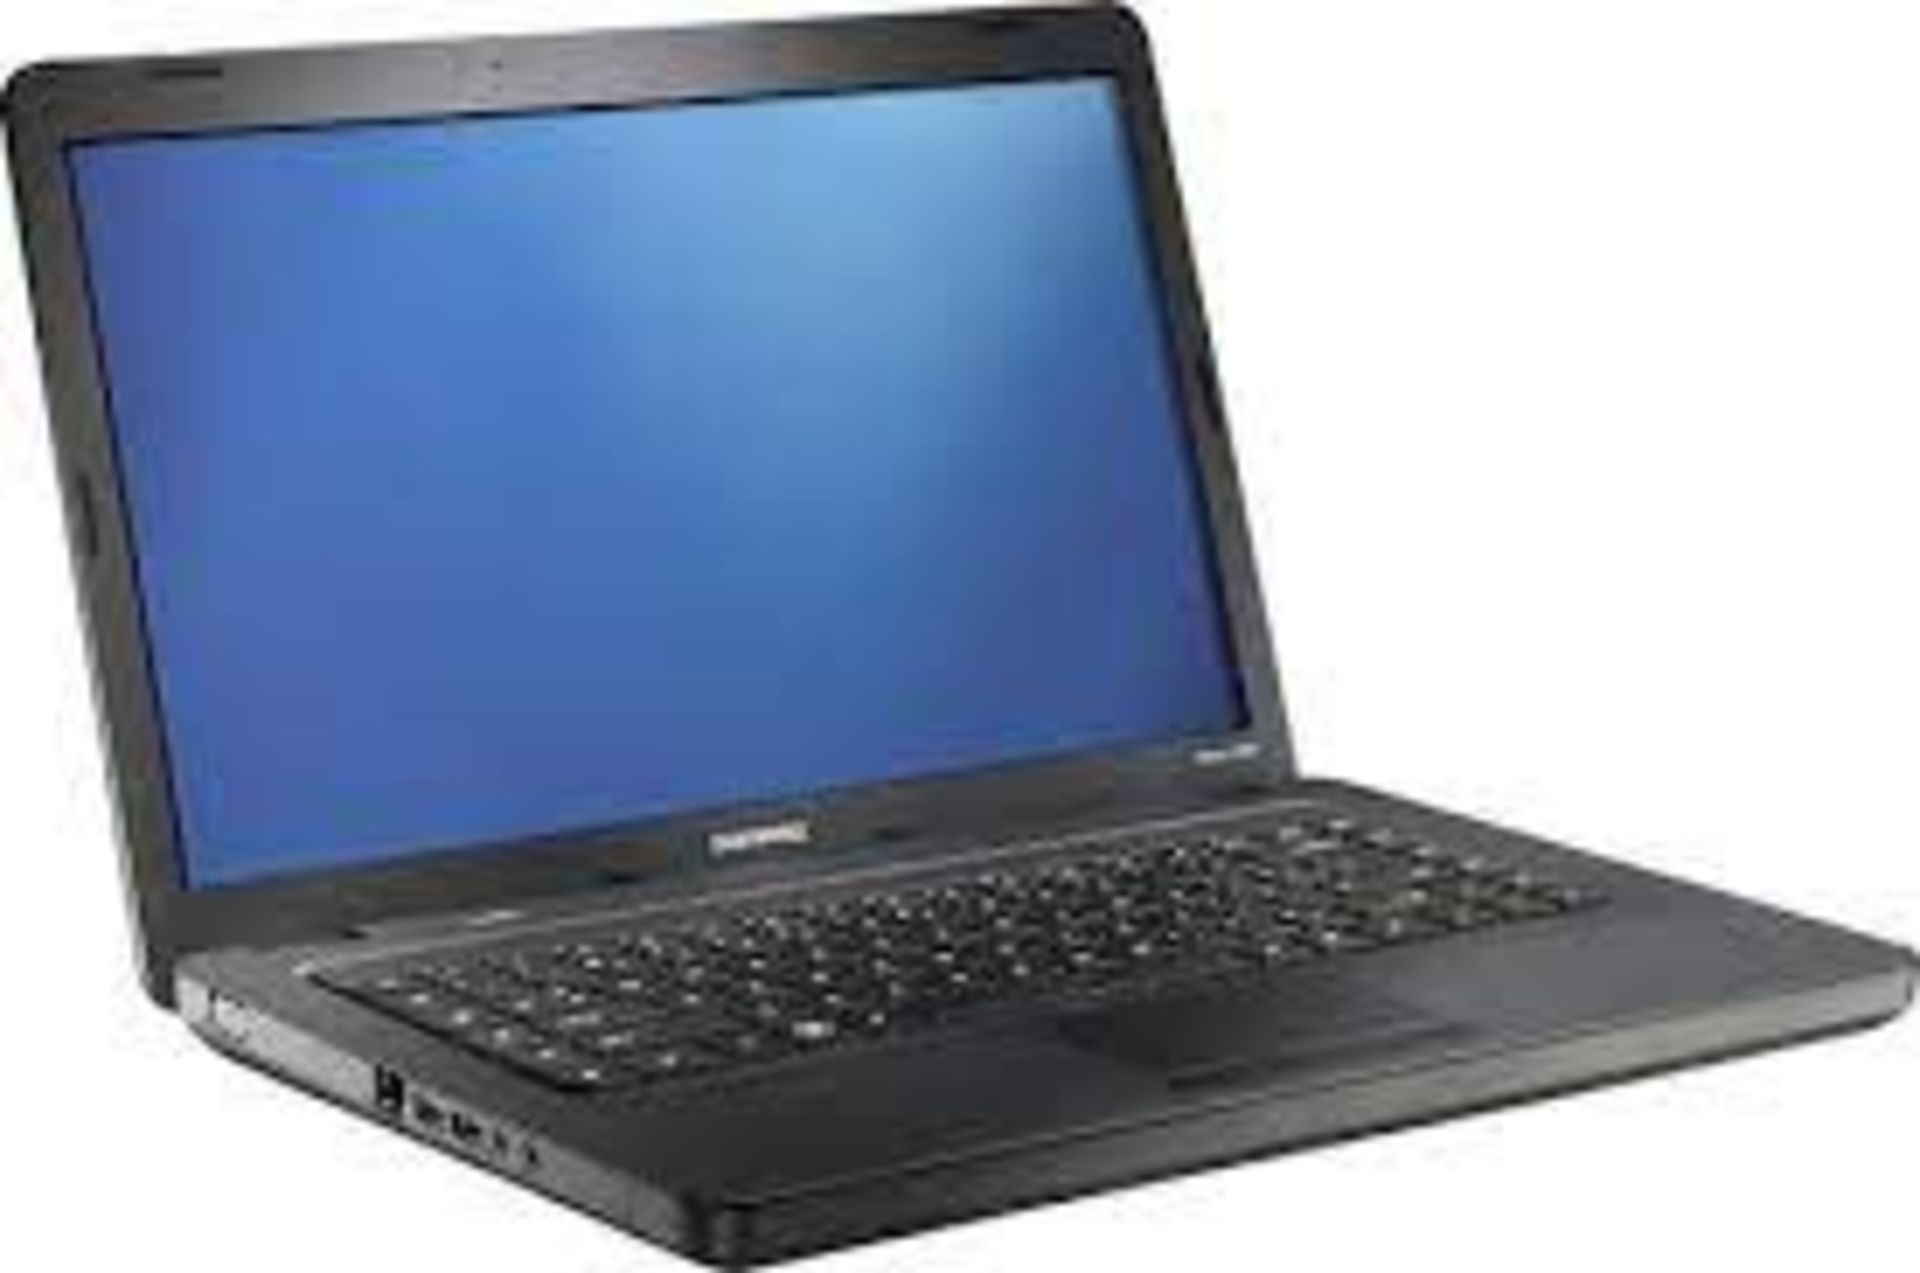 (R9K) Tech. 1 X Compaq Presario CQ56 Laptop (Starts – Password Protected). With Power Lead